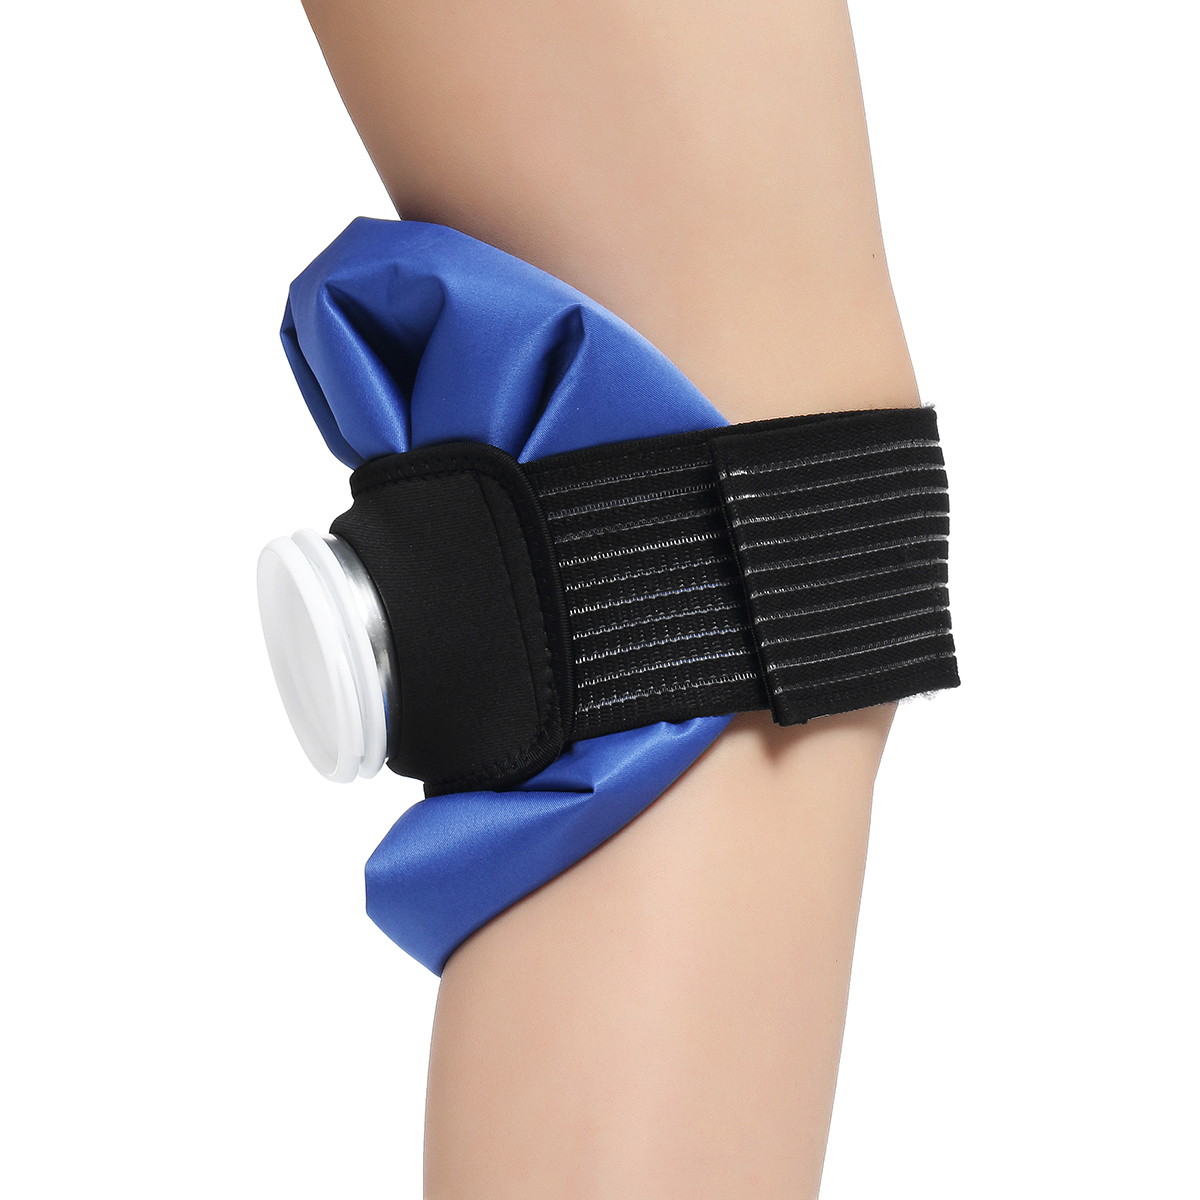 Ice-Bag-Pack-Pain-Relief-Cold-Broad-Knee-Shoulder-Injuries-Therapy-Strap-Wrap-Elastic-Tie-Belt-1551776-4